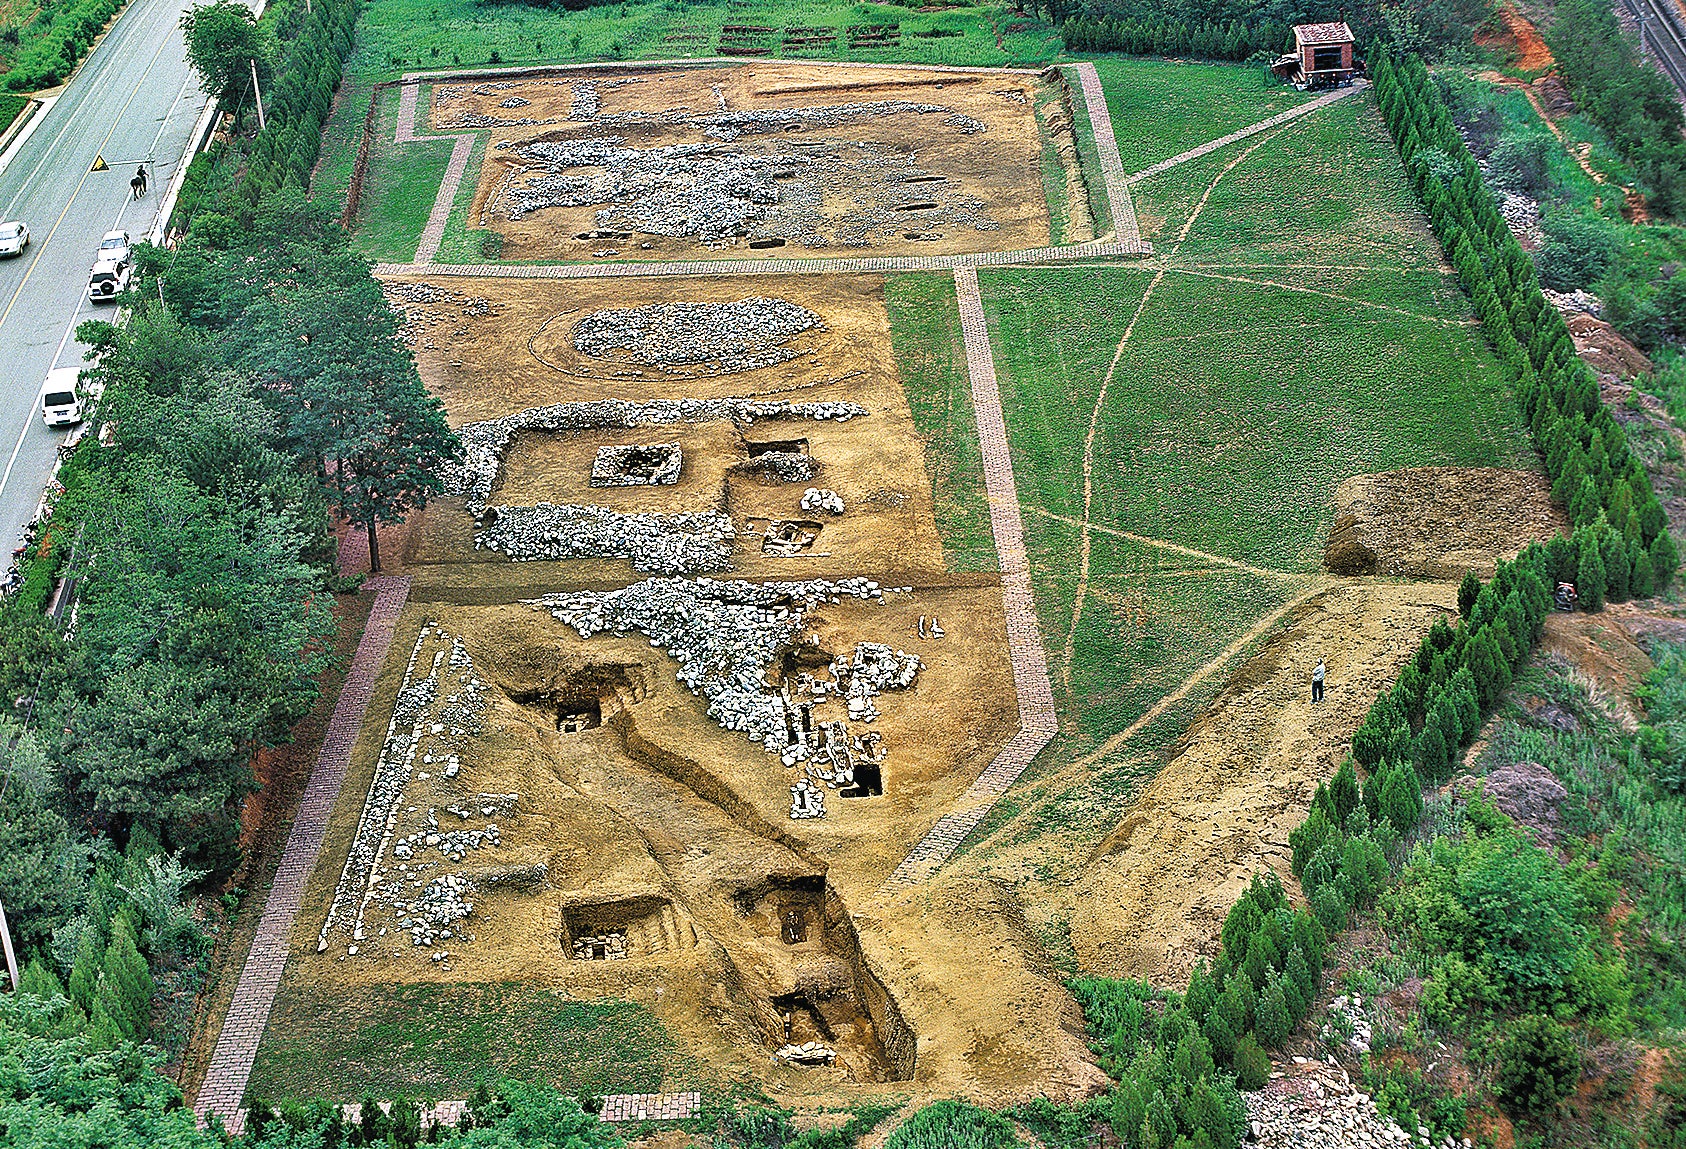 An aerial view of the Niuheliang site, a representative of Hongshan Culture in Liaoning province